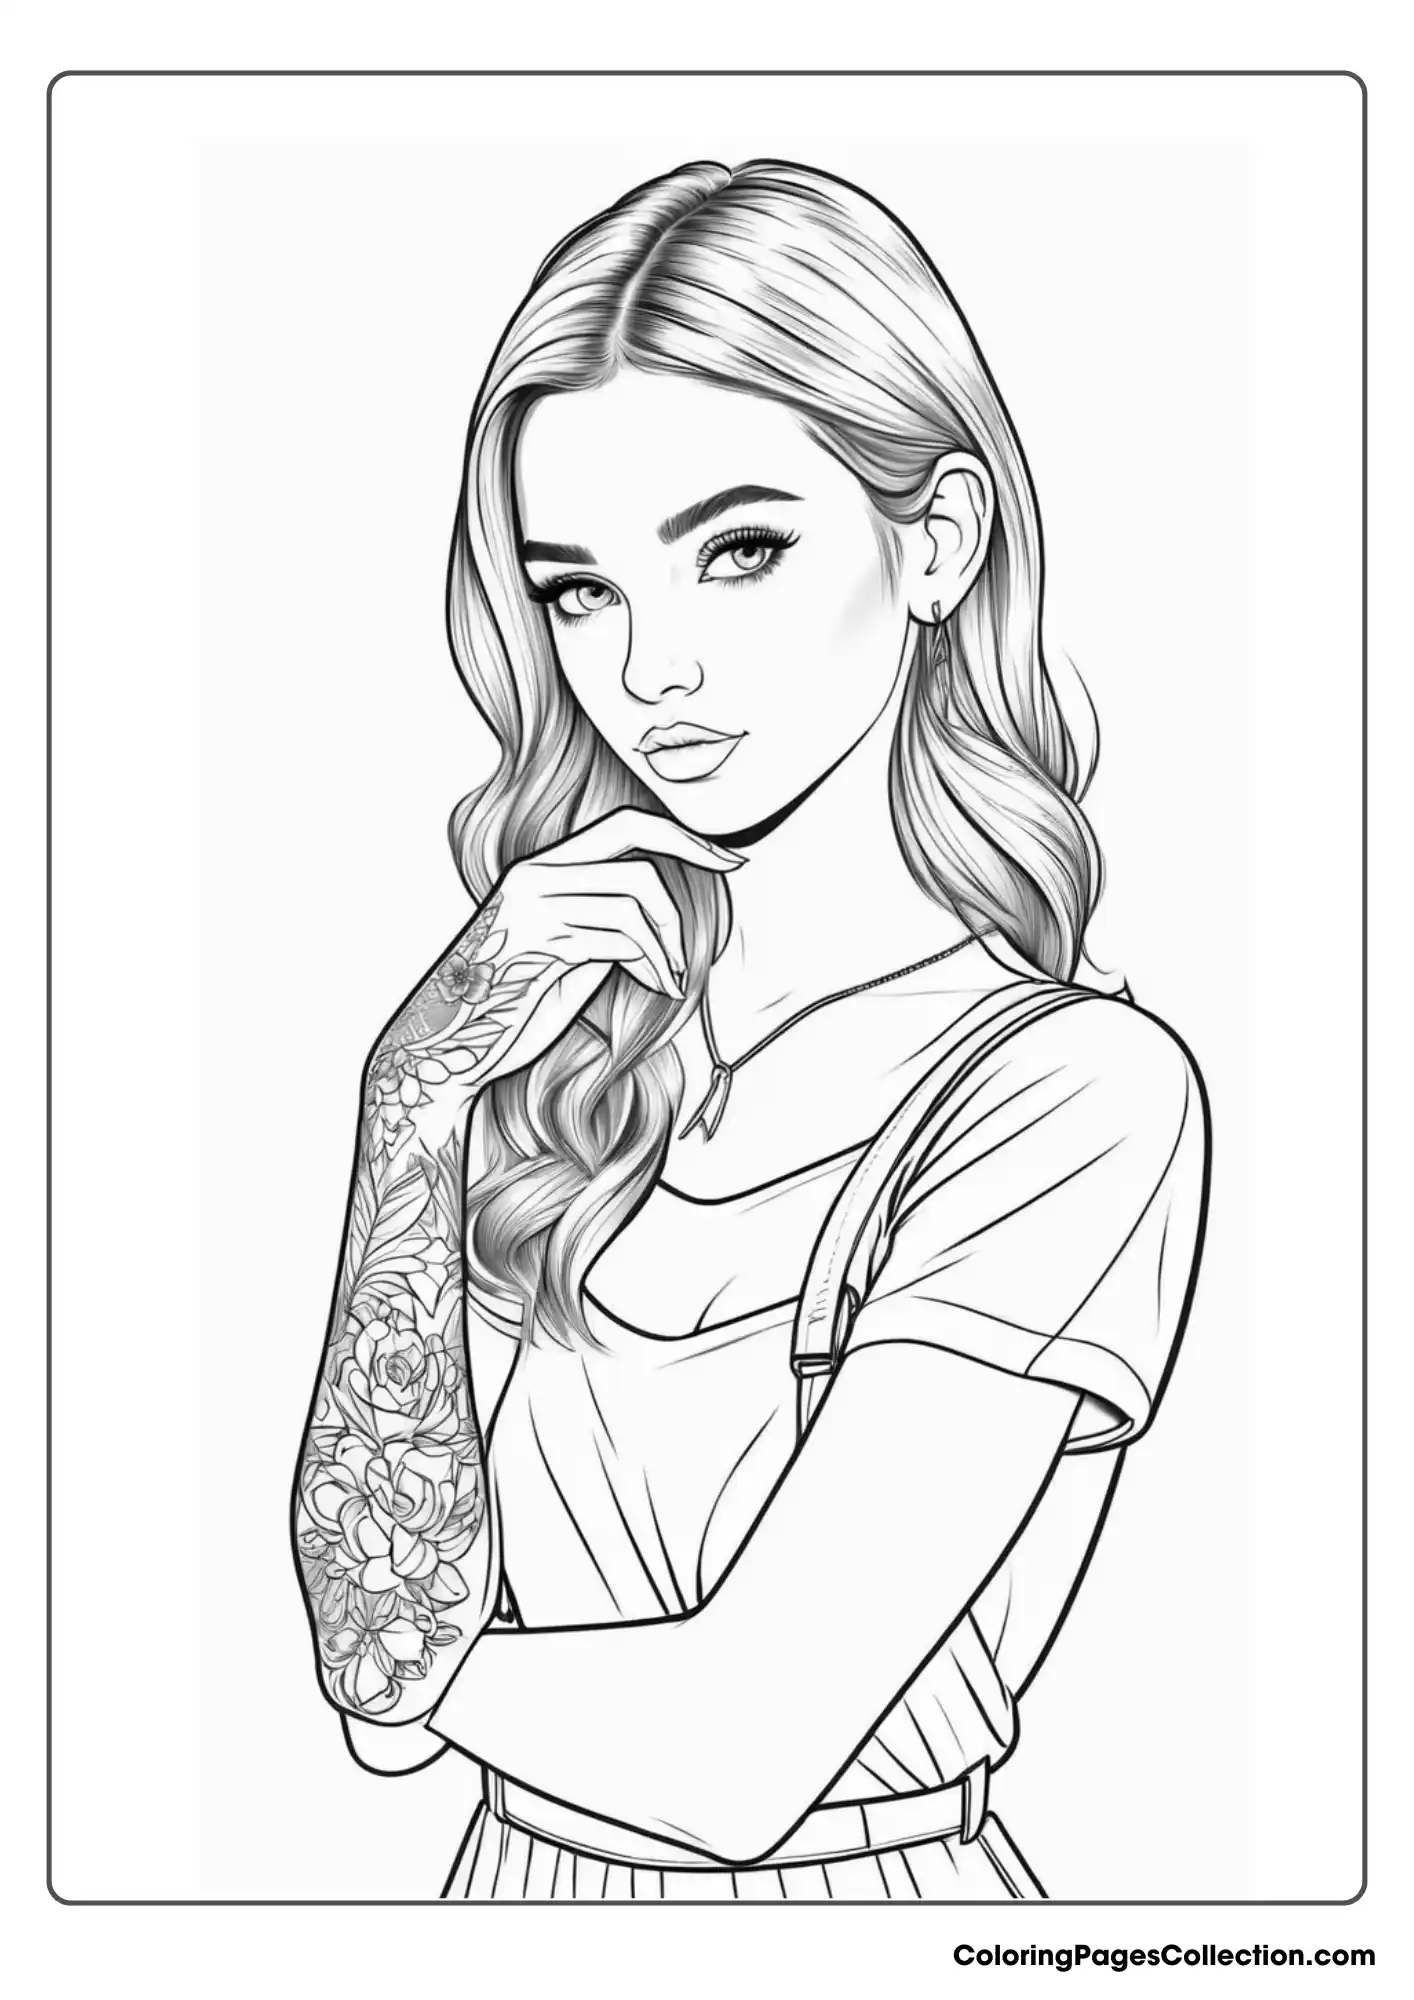 Coloring pages for teens, Girl with Tattoo on Her Right Hand